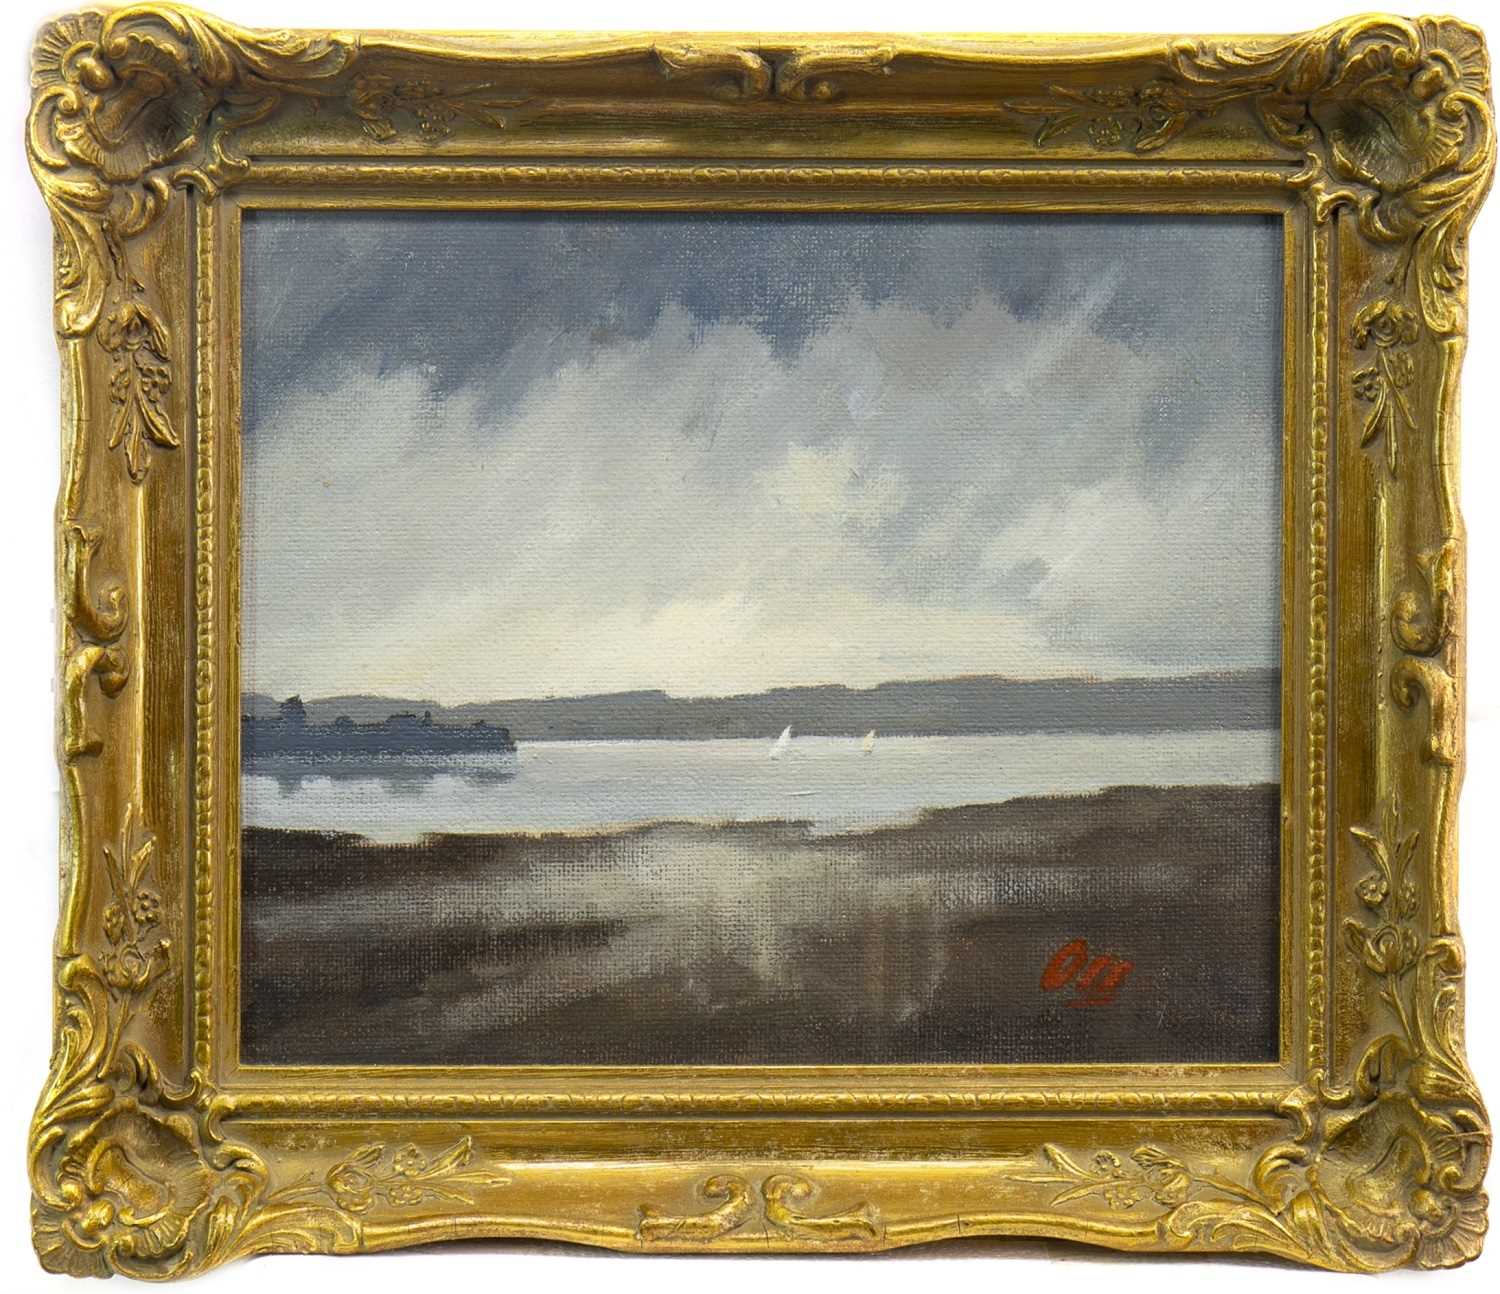 Lot 507 - TROON HARBOUR, AN OIL BY JAMES ORR